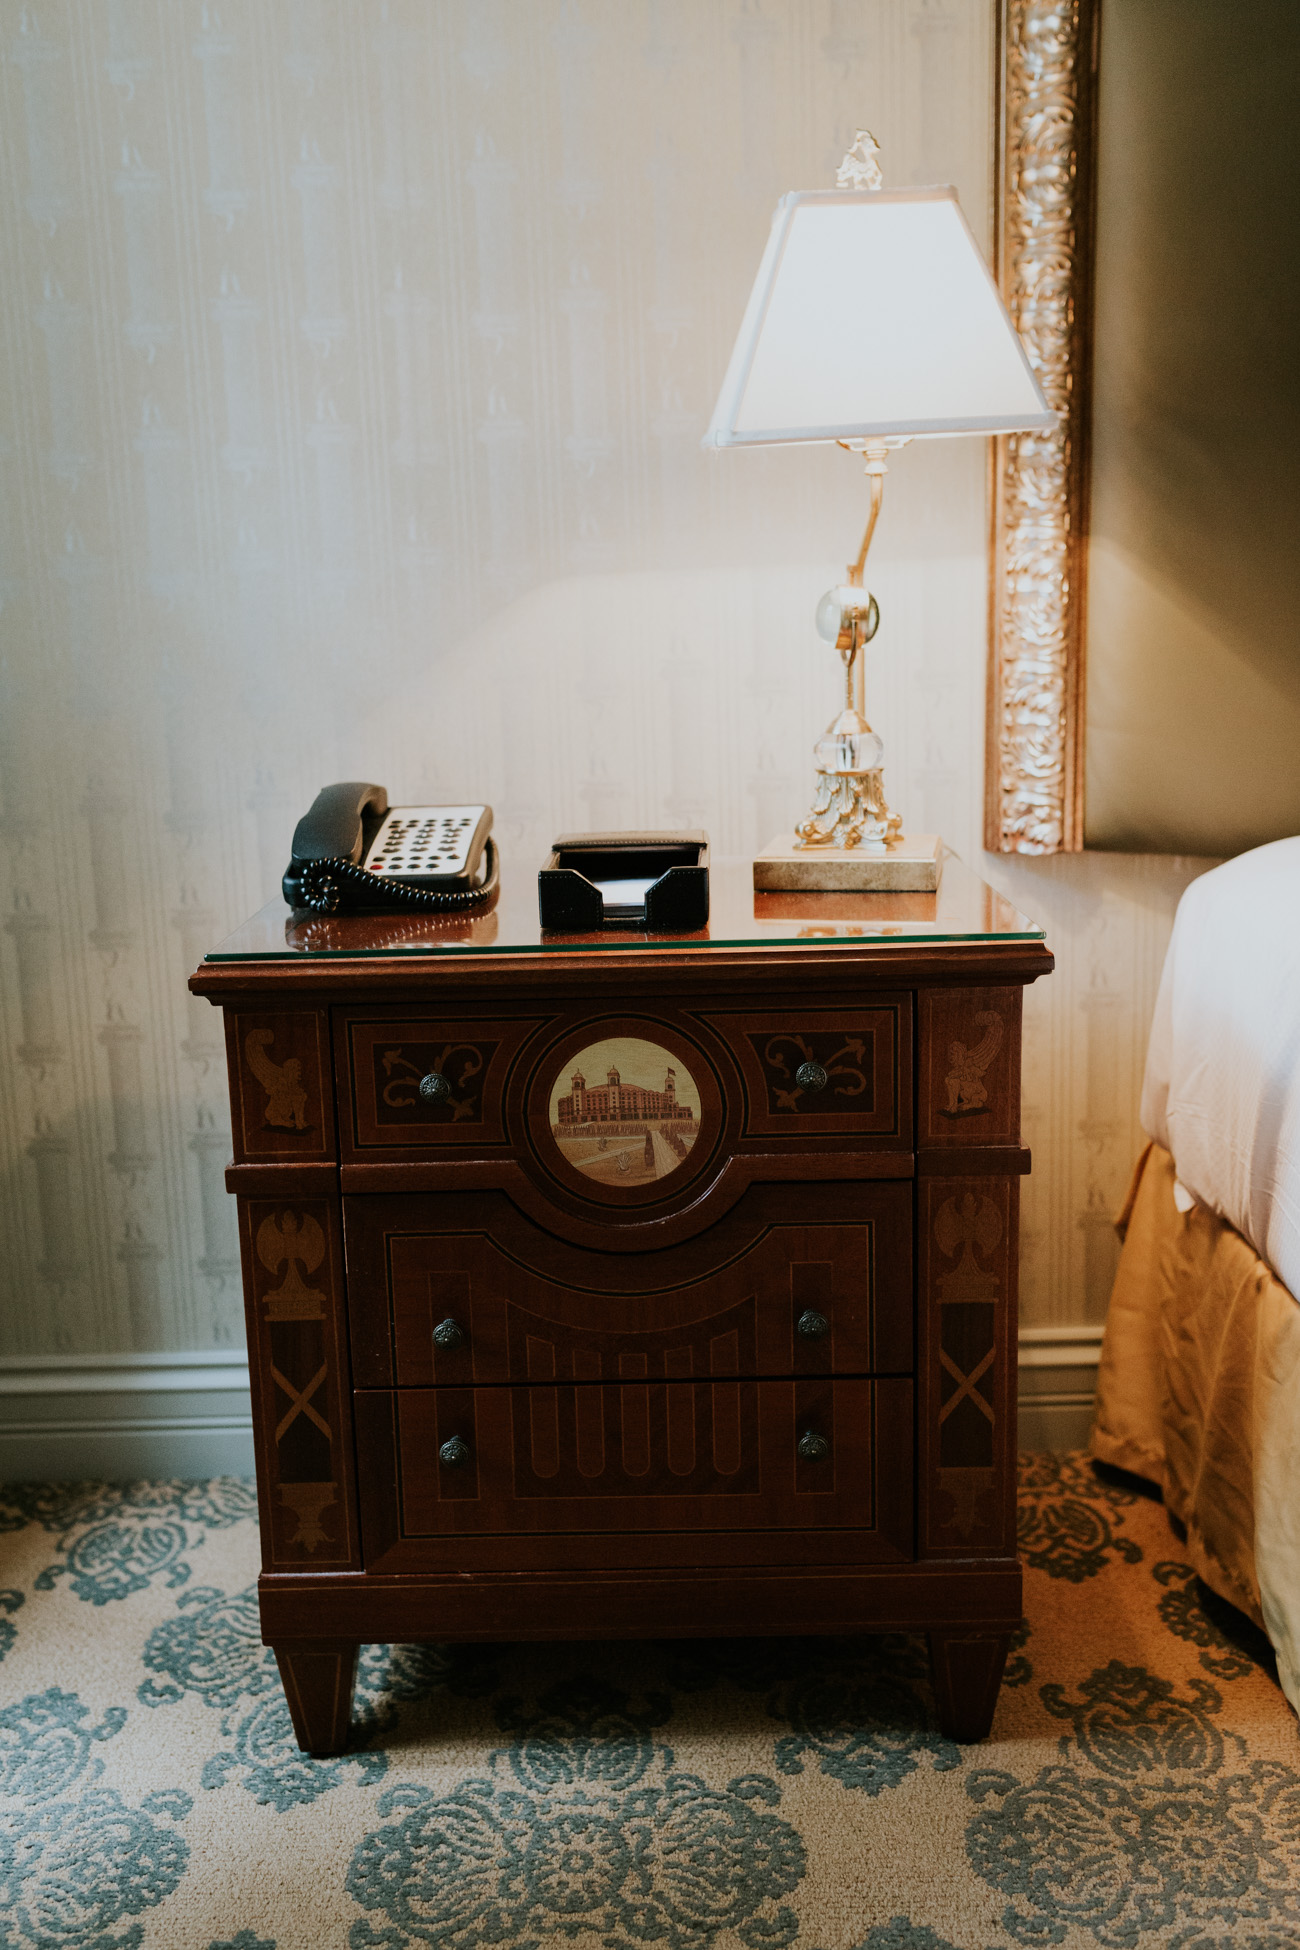 indiana weekend getaway, french lick resort and casino, french lick indiana, west baden indiana, west baden springs hotel, french lick spa, french lick golf course, kentucky weekend getaway, bed and breakfast // grace wainwright a southern drawl